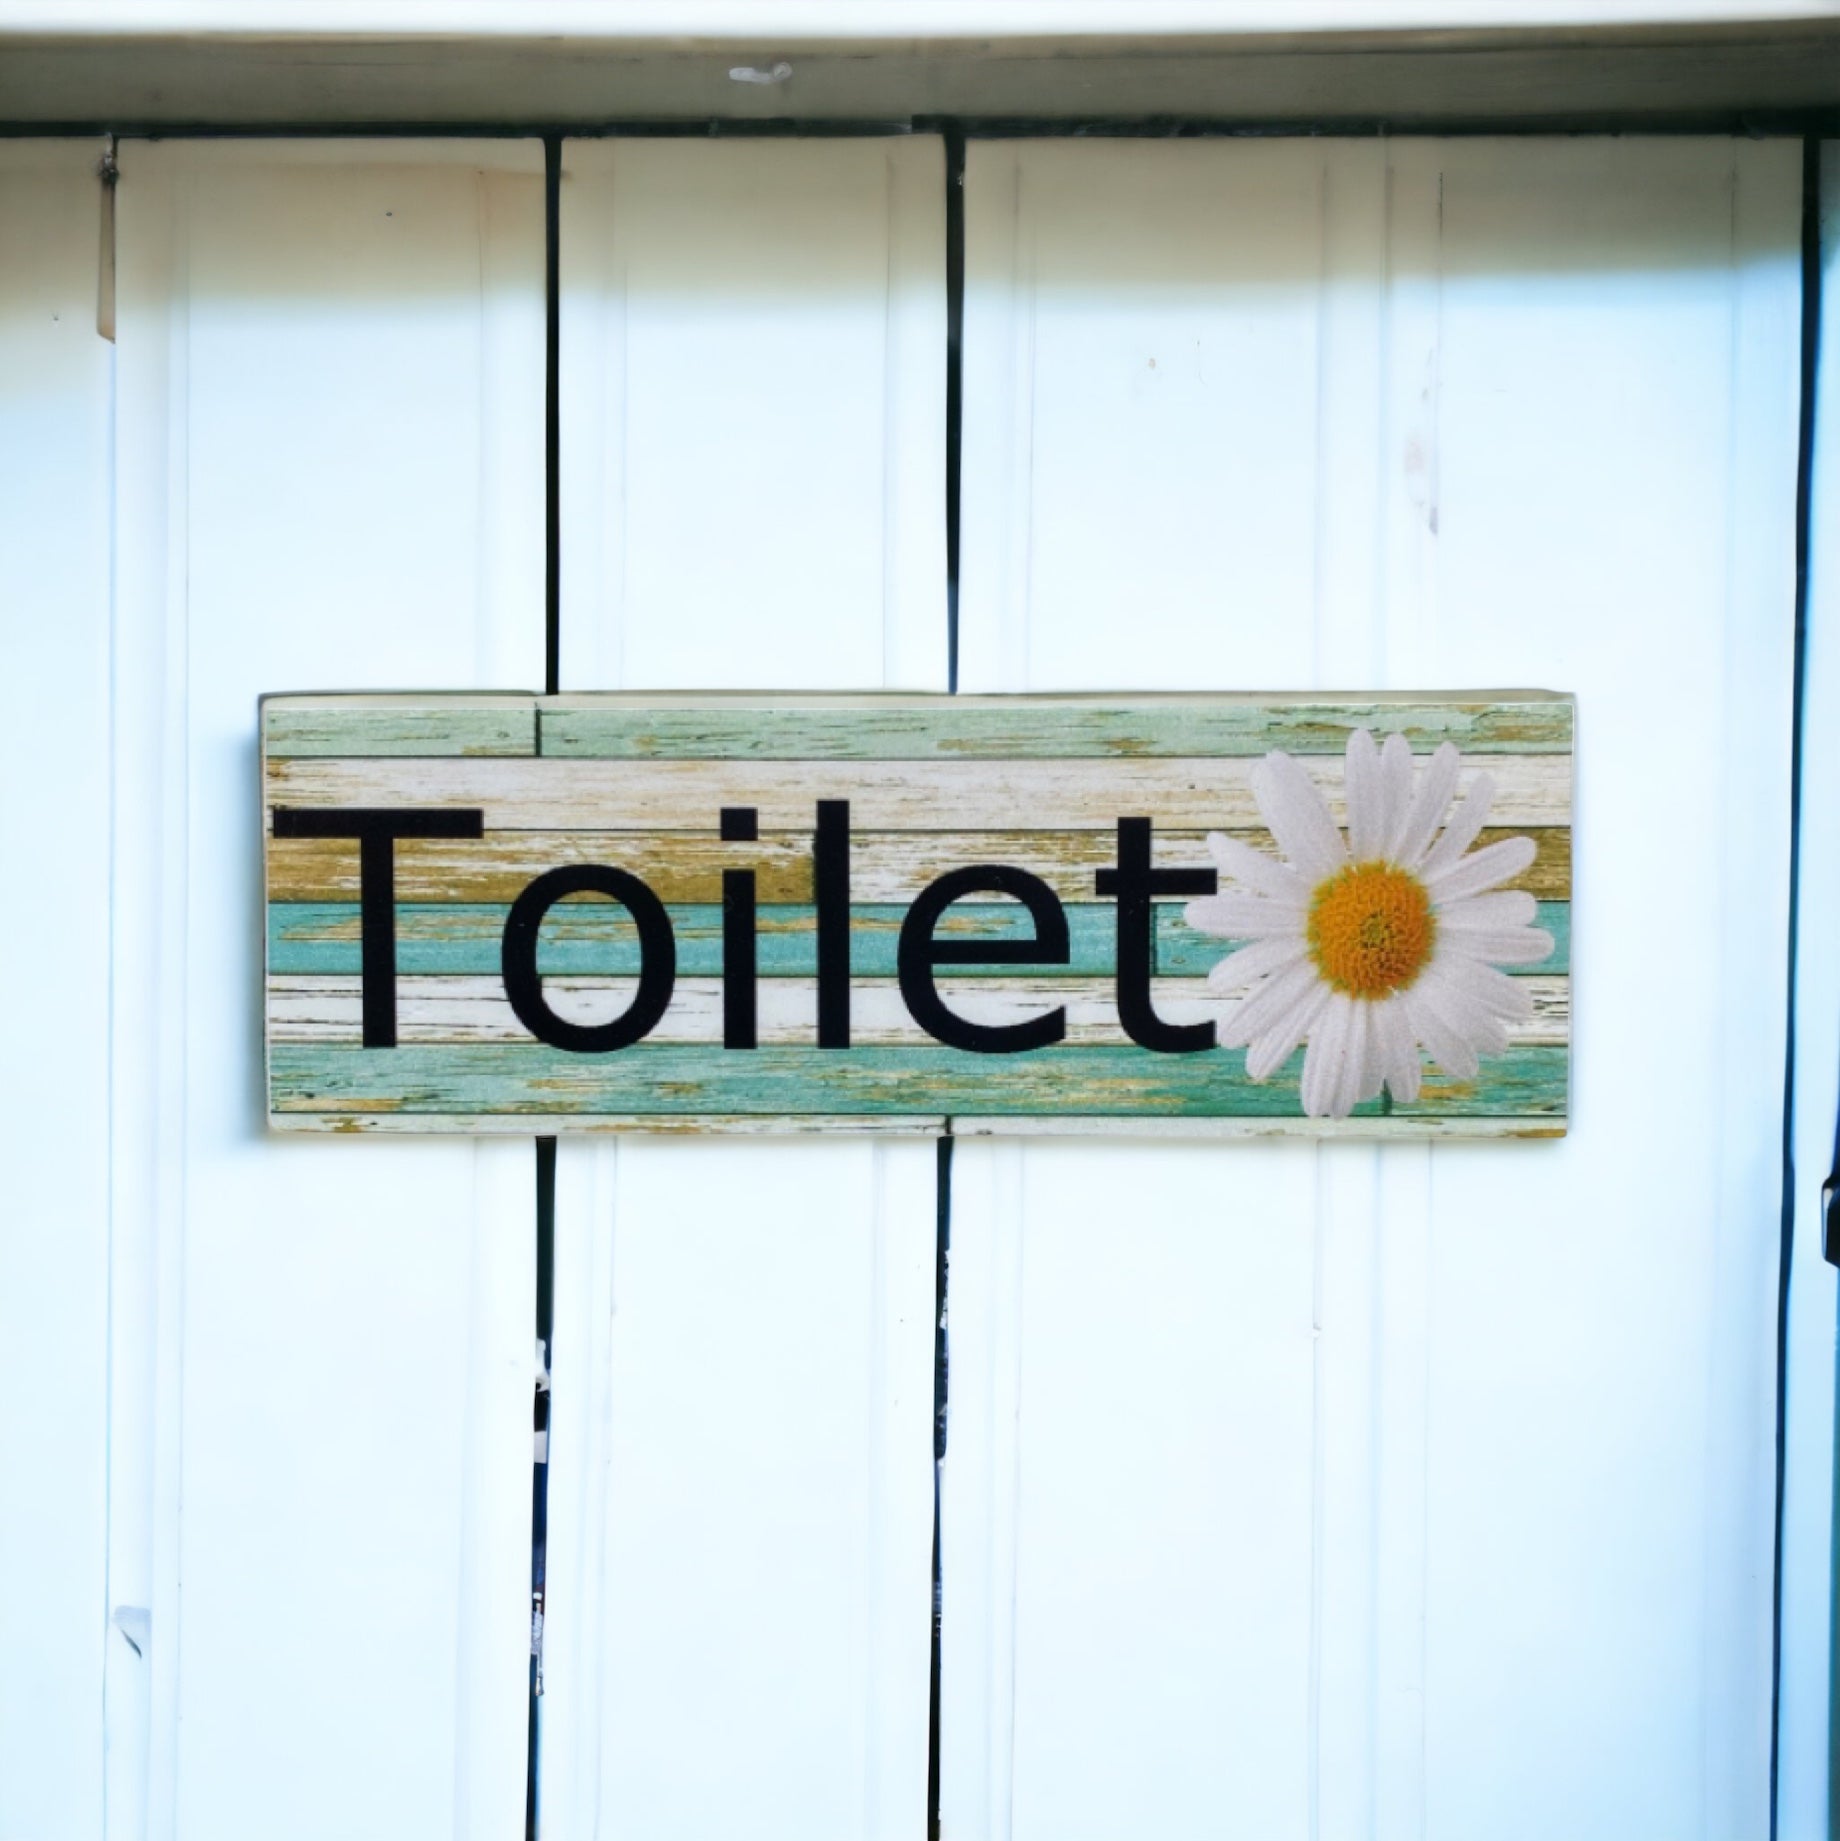 Daisy Flower Toilet Laundry Bathroom Door Sign - The Renmy Store Homewares & Gifts 